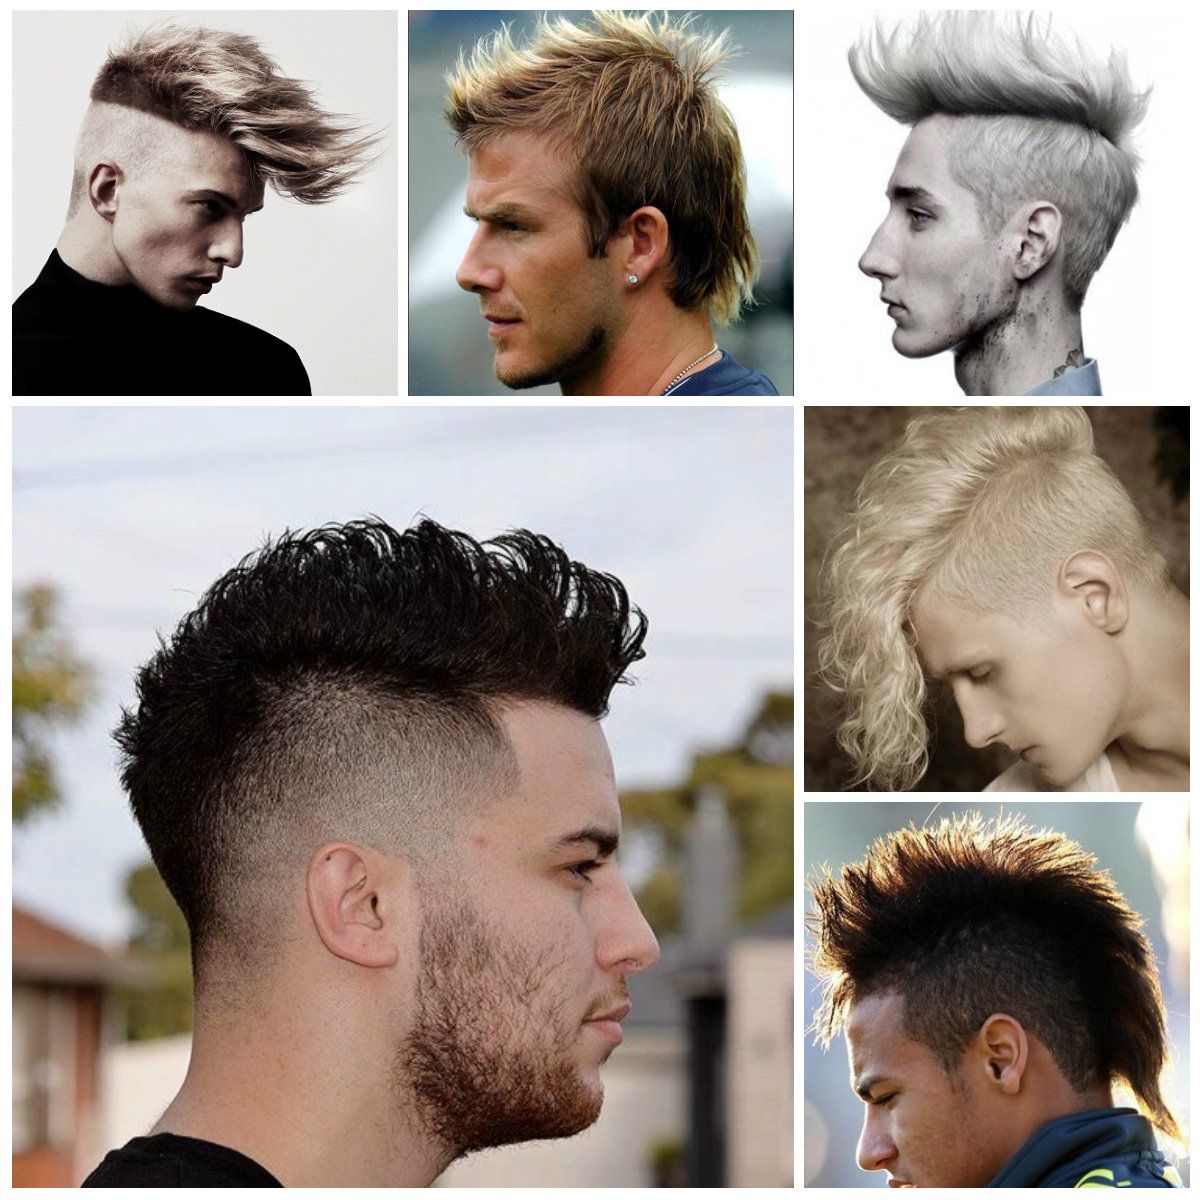 2019 Trendy Mohawk Hairstyles For Men – Best Hairstyles Pertaining To Widely Used Short Hair Inspired Mohawk Hairstyles (Gallery 19 of 20)